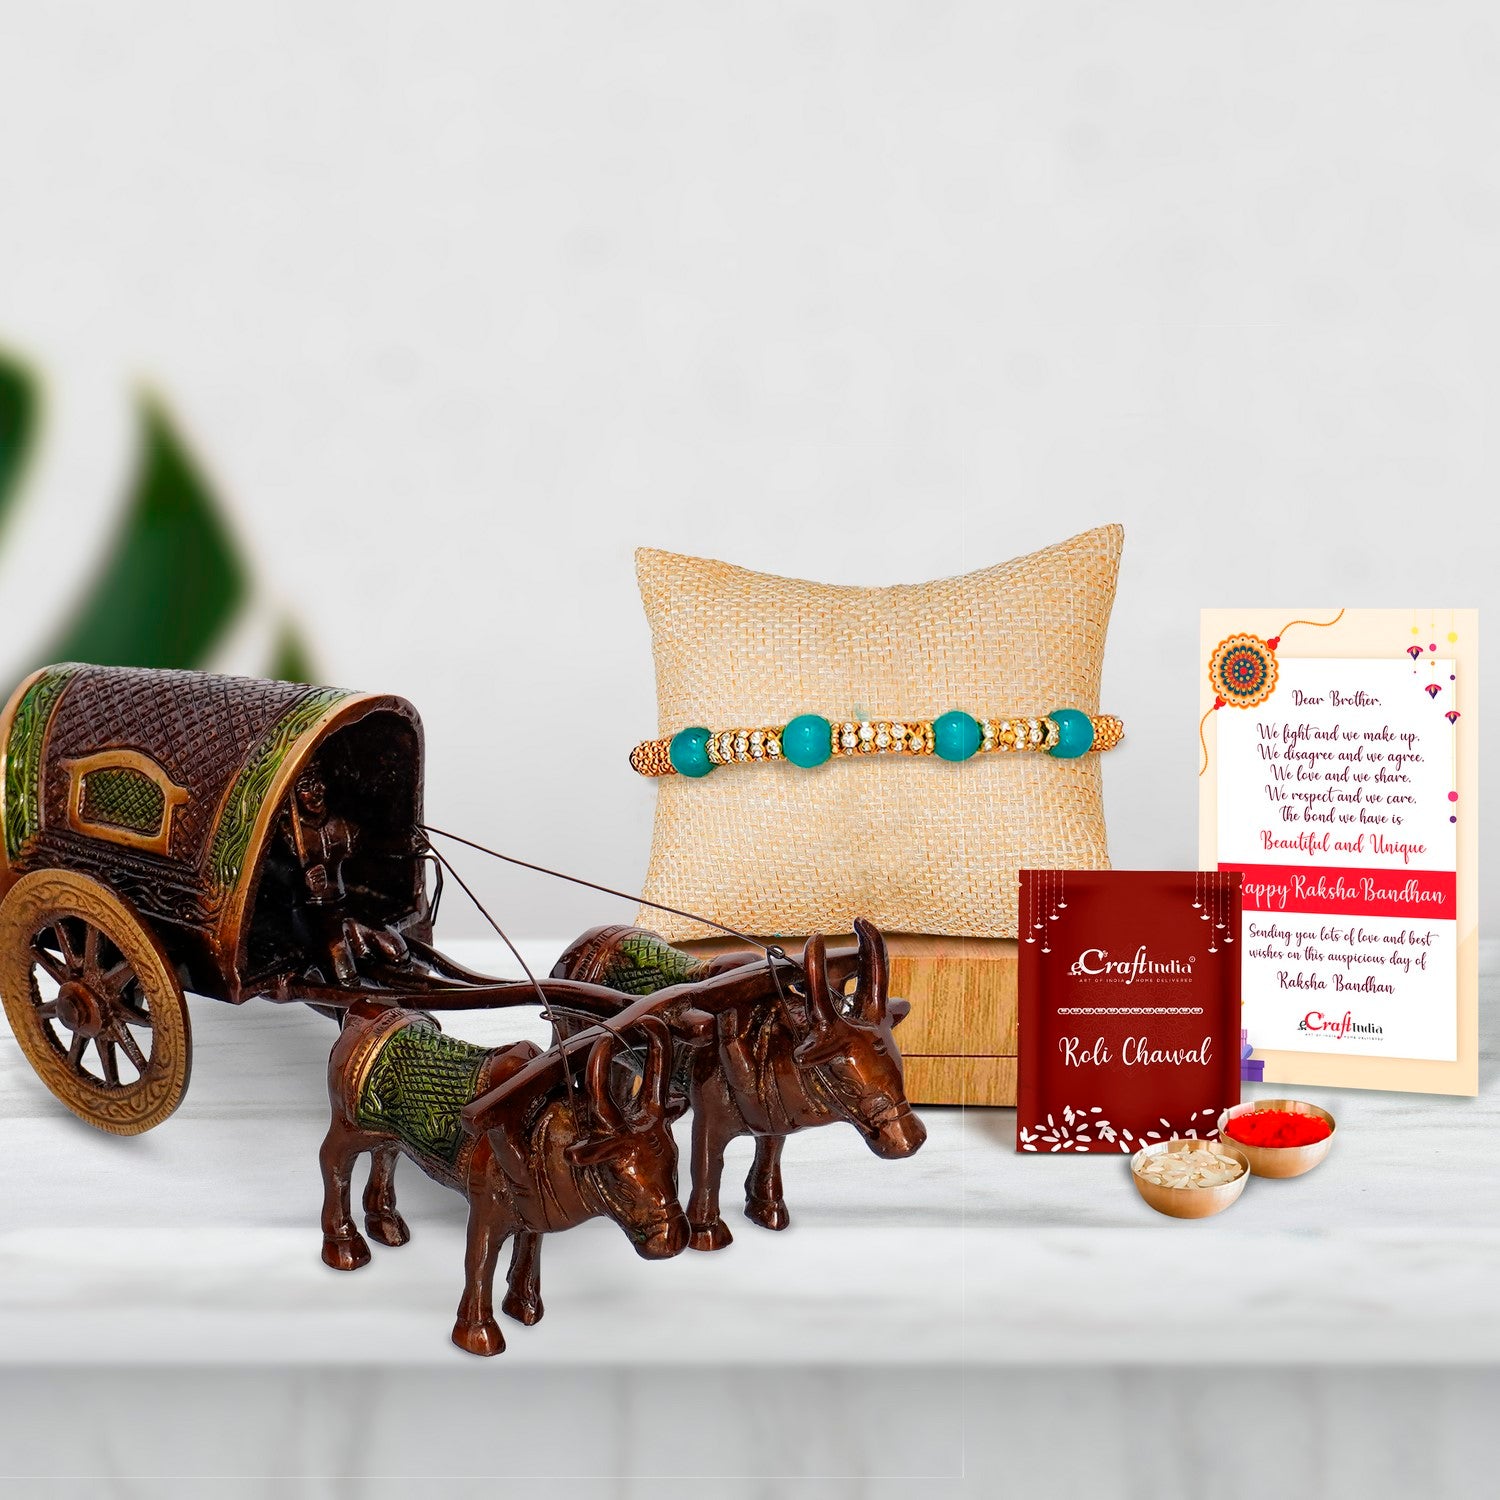 Designer Pearl Rakhi with Brass Brown and Green Antique Finish Closed Bullock Cart  and Roli Chawal Pack, Best Wishes Greeting Card